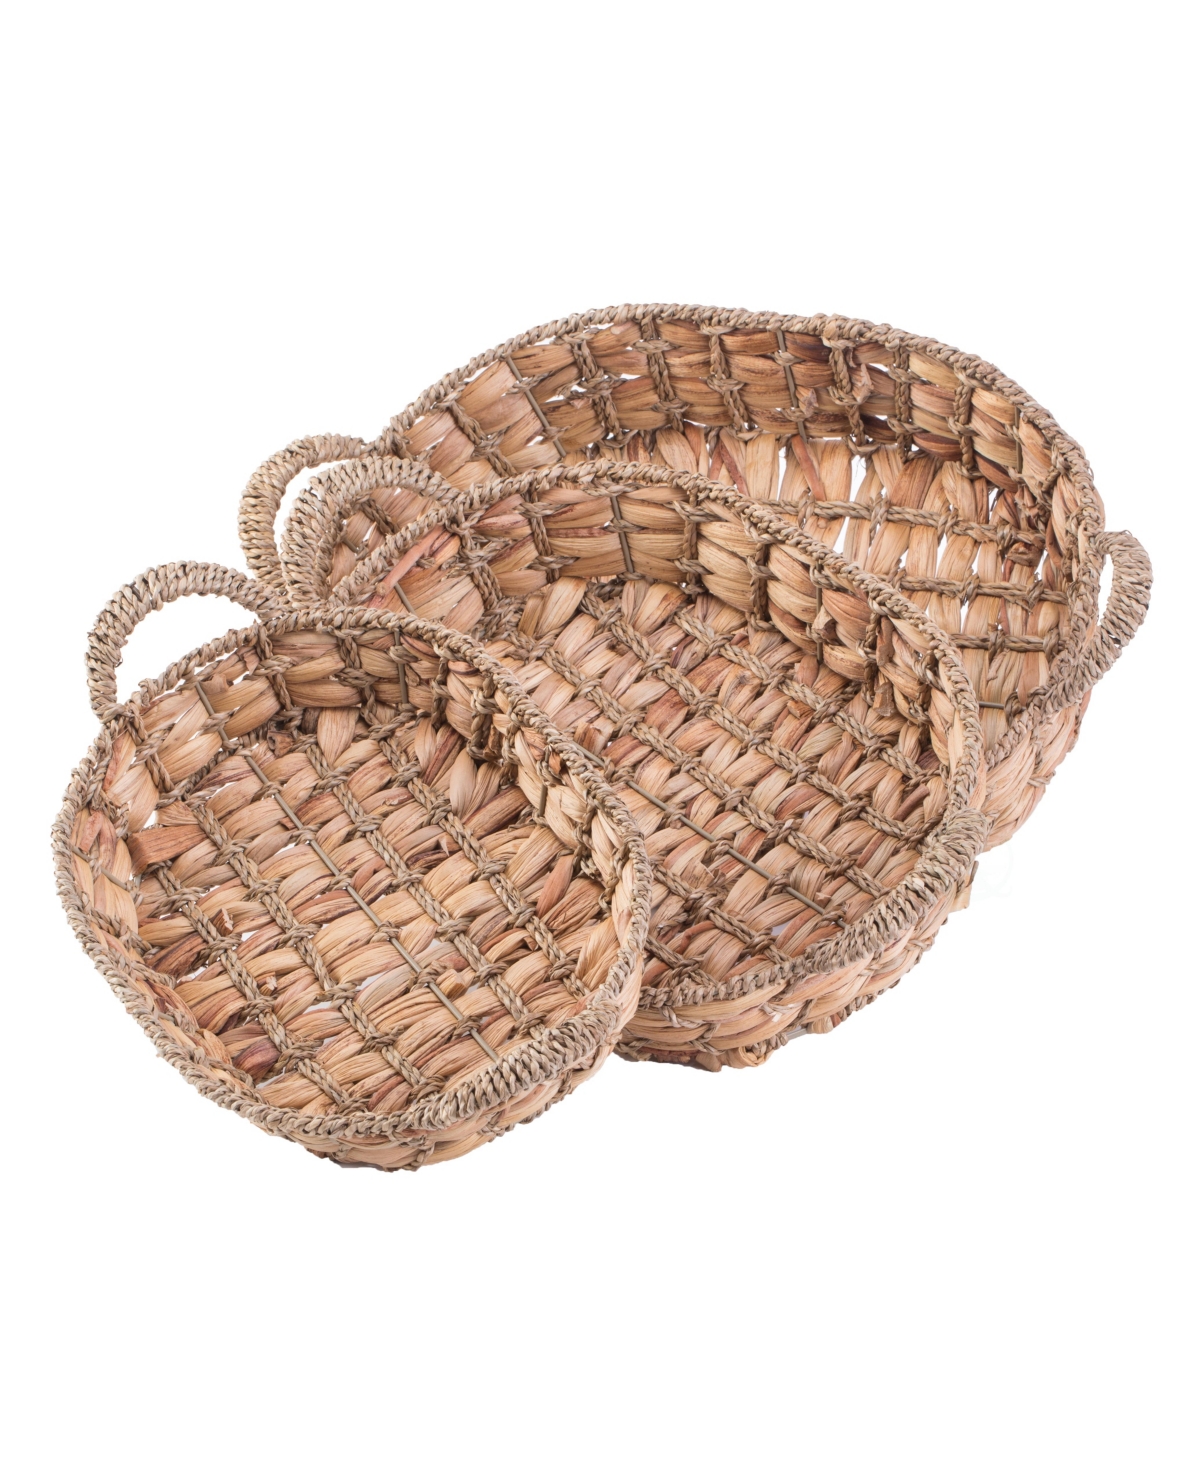 Set of 3 Seagrass Fruit Bread Basket Trays with Handles - Natural